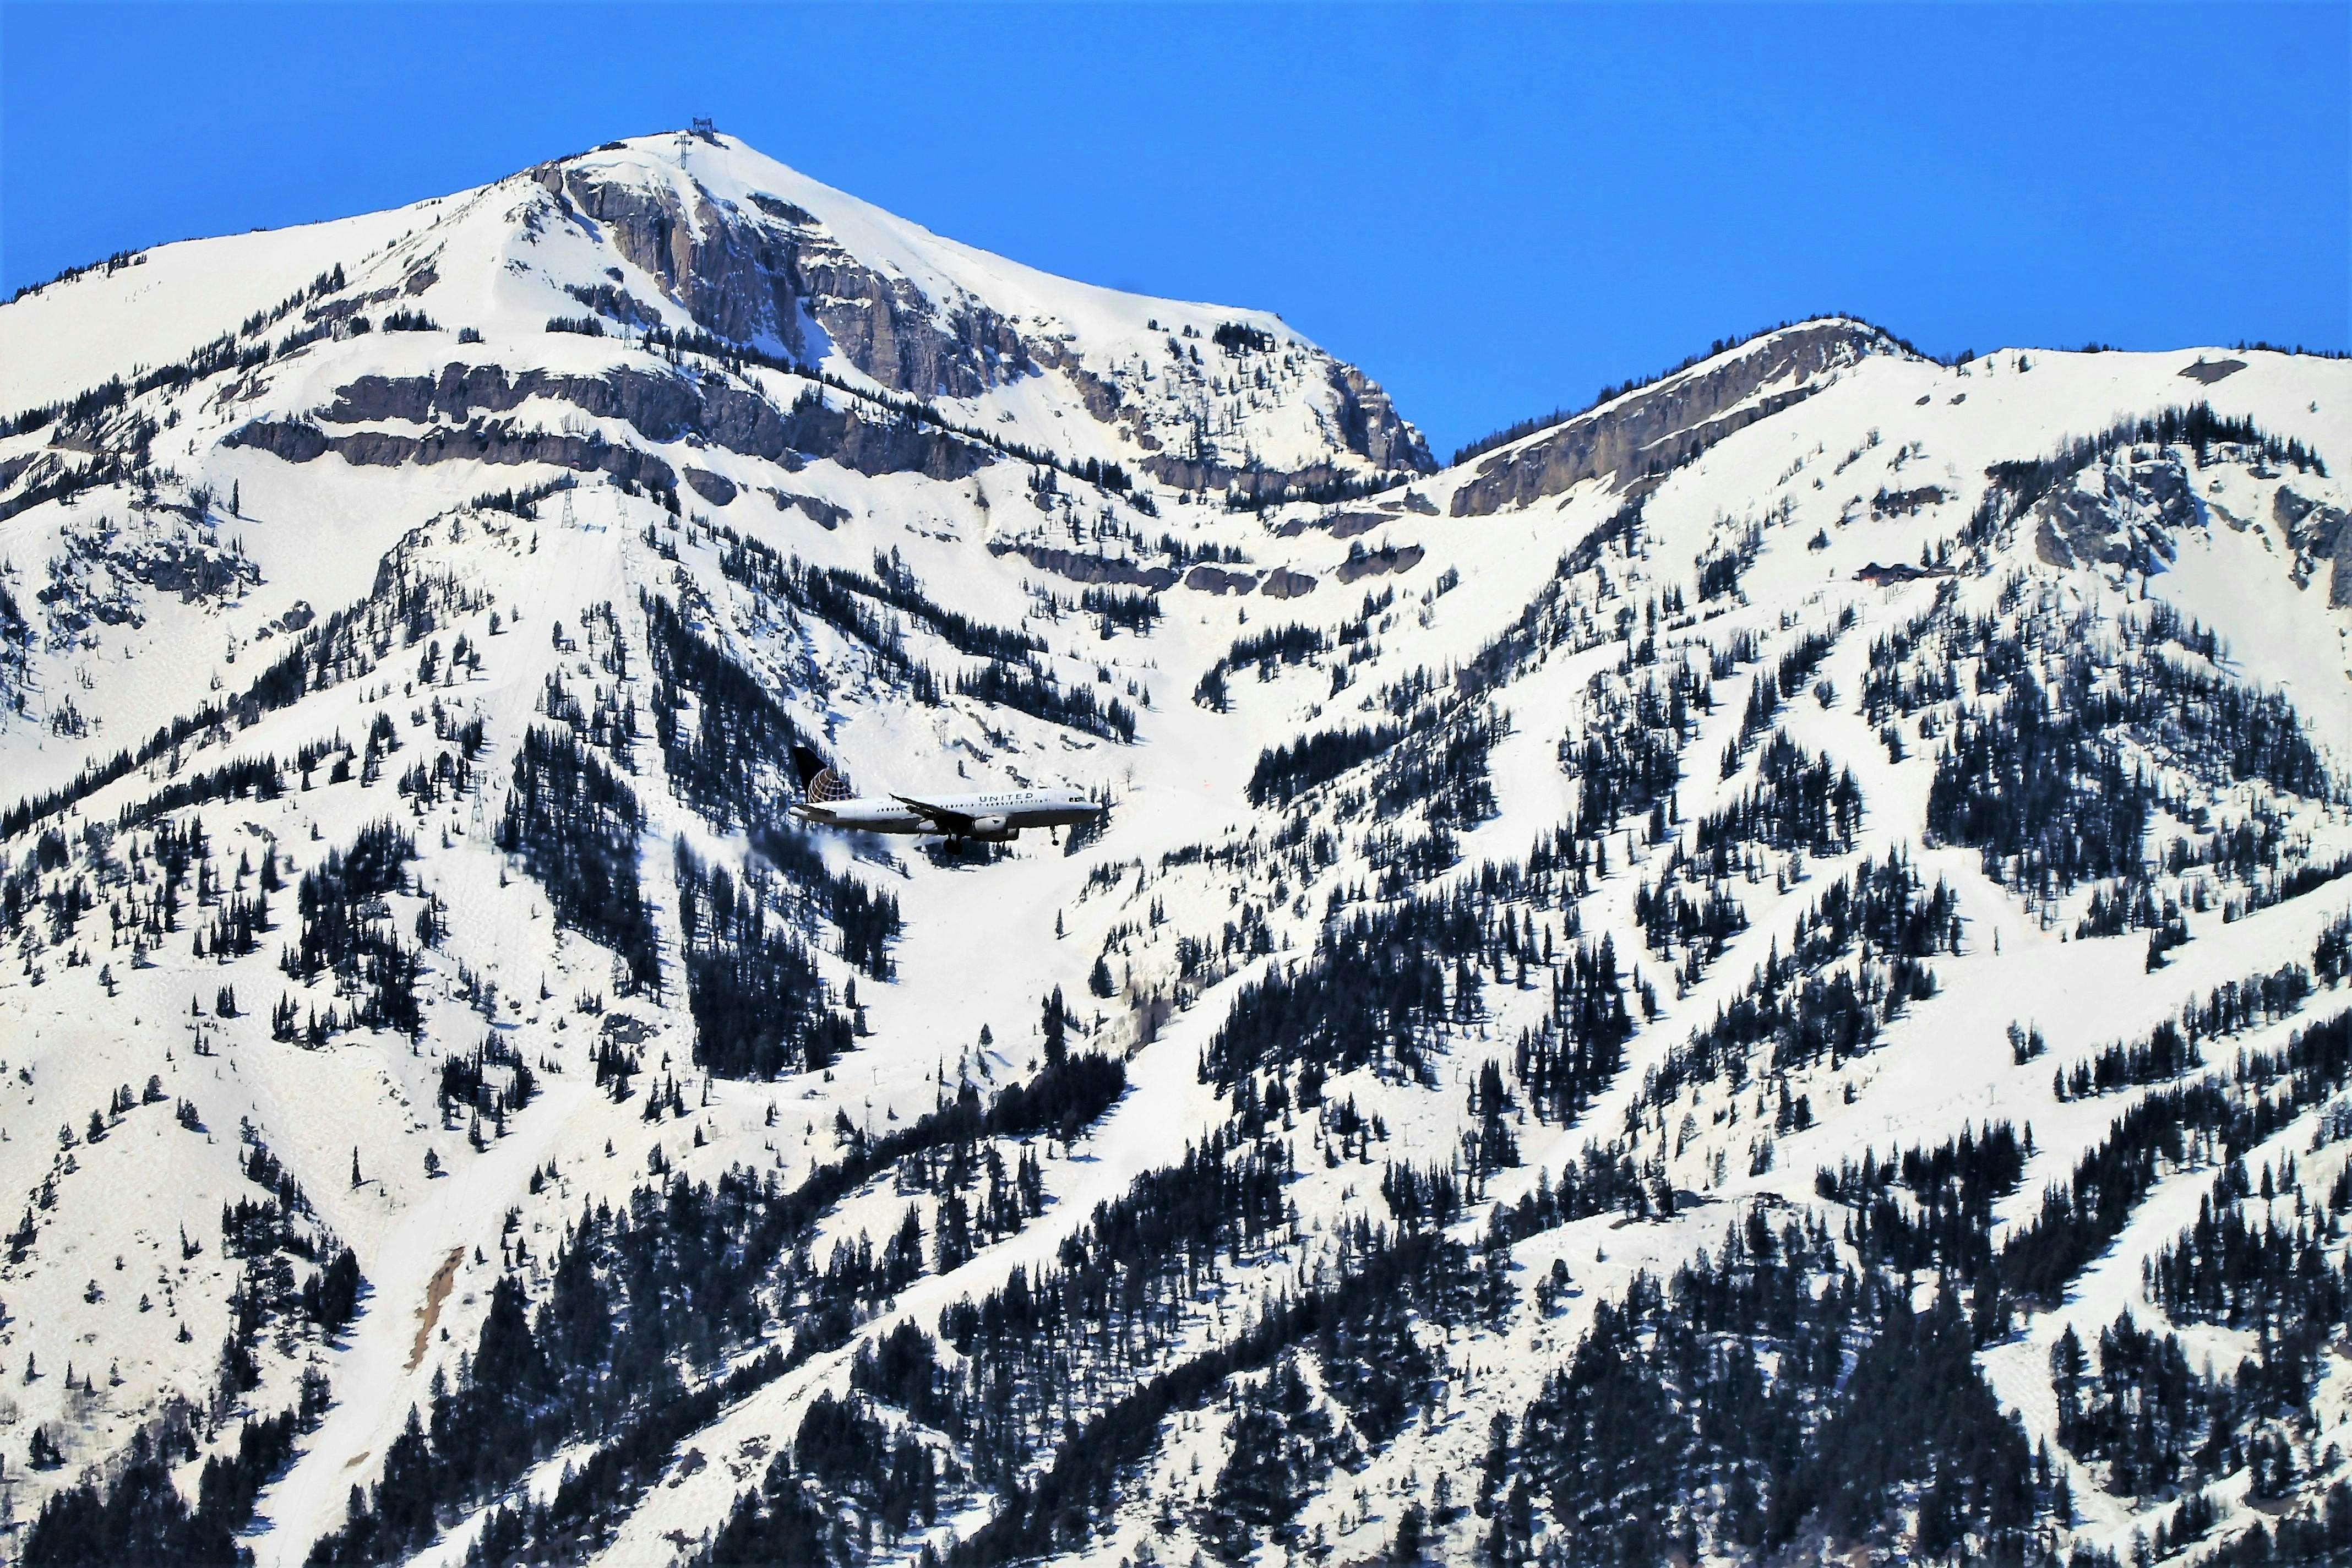 A plane descends past Jackson Hole Mountain Resort in its descent to Jackson Hole Airport.